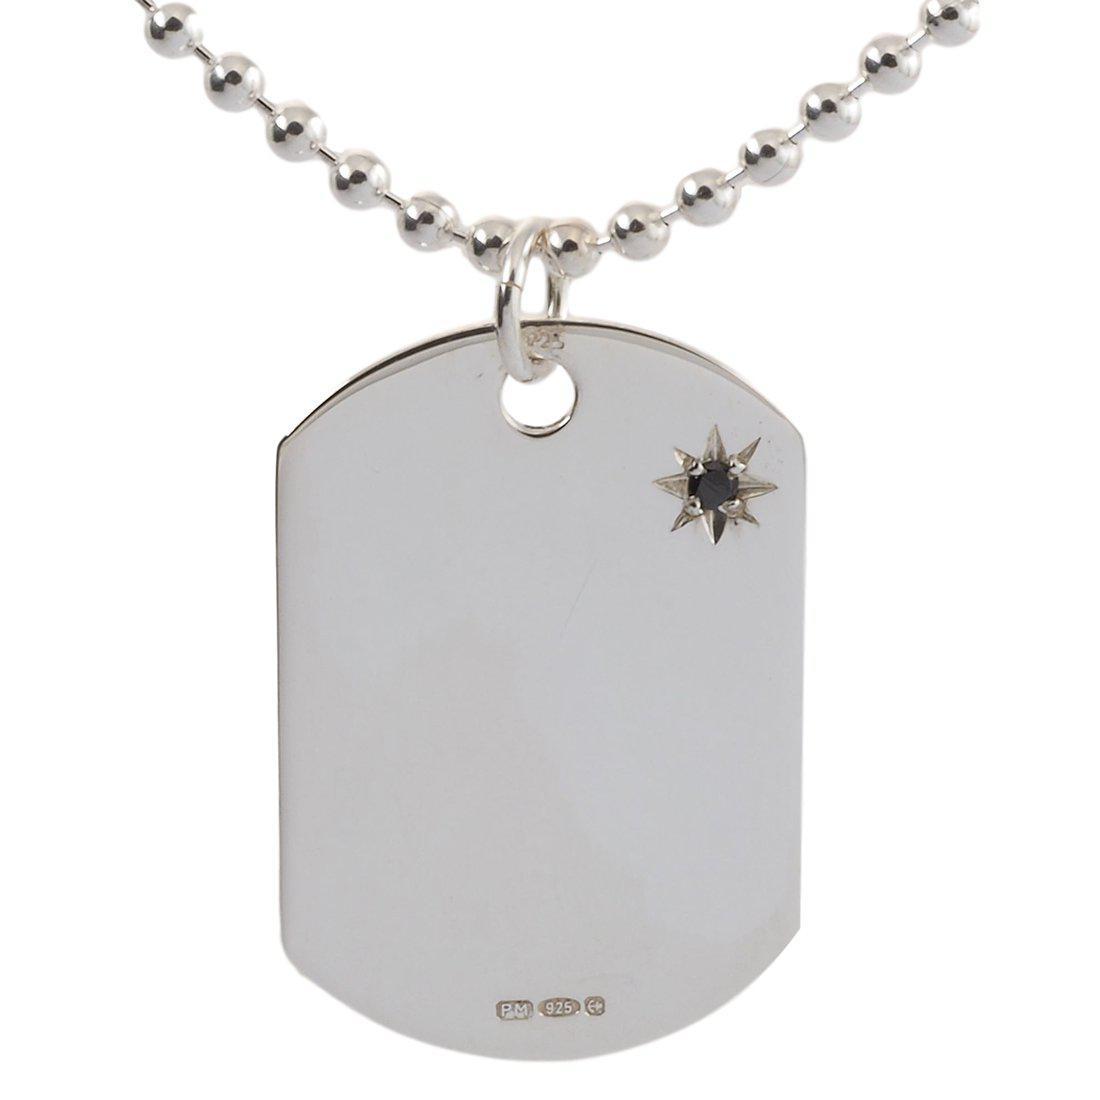 Buy Sarah Military Theme Cross Pendant Necklace/Dog Tag For Men - Silver  Tone at Amazon.in